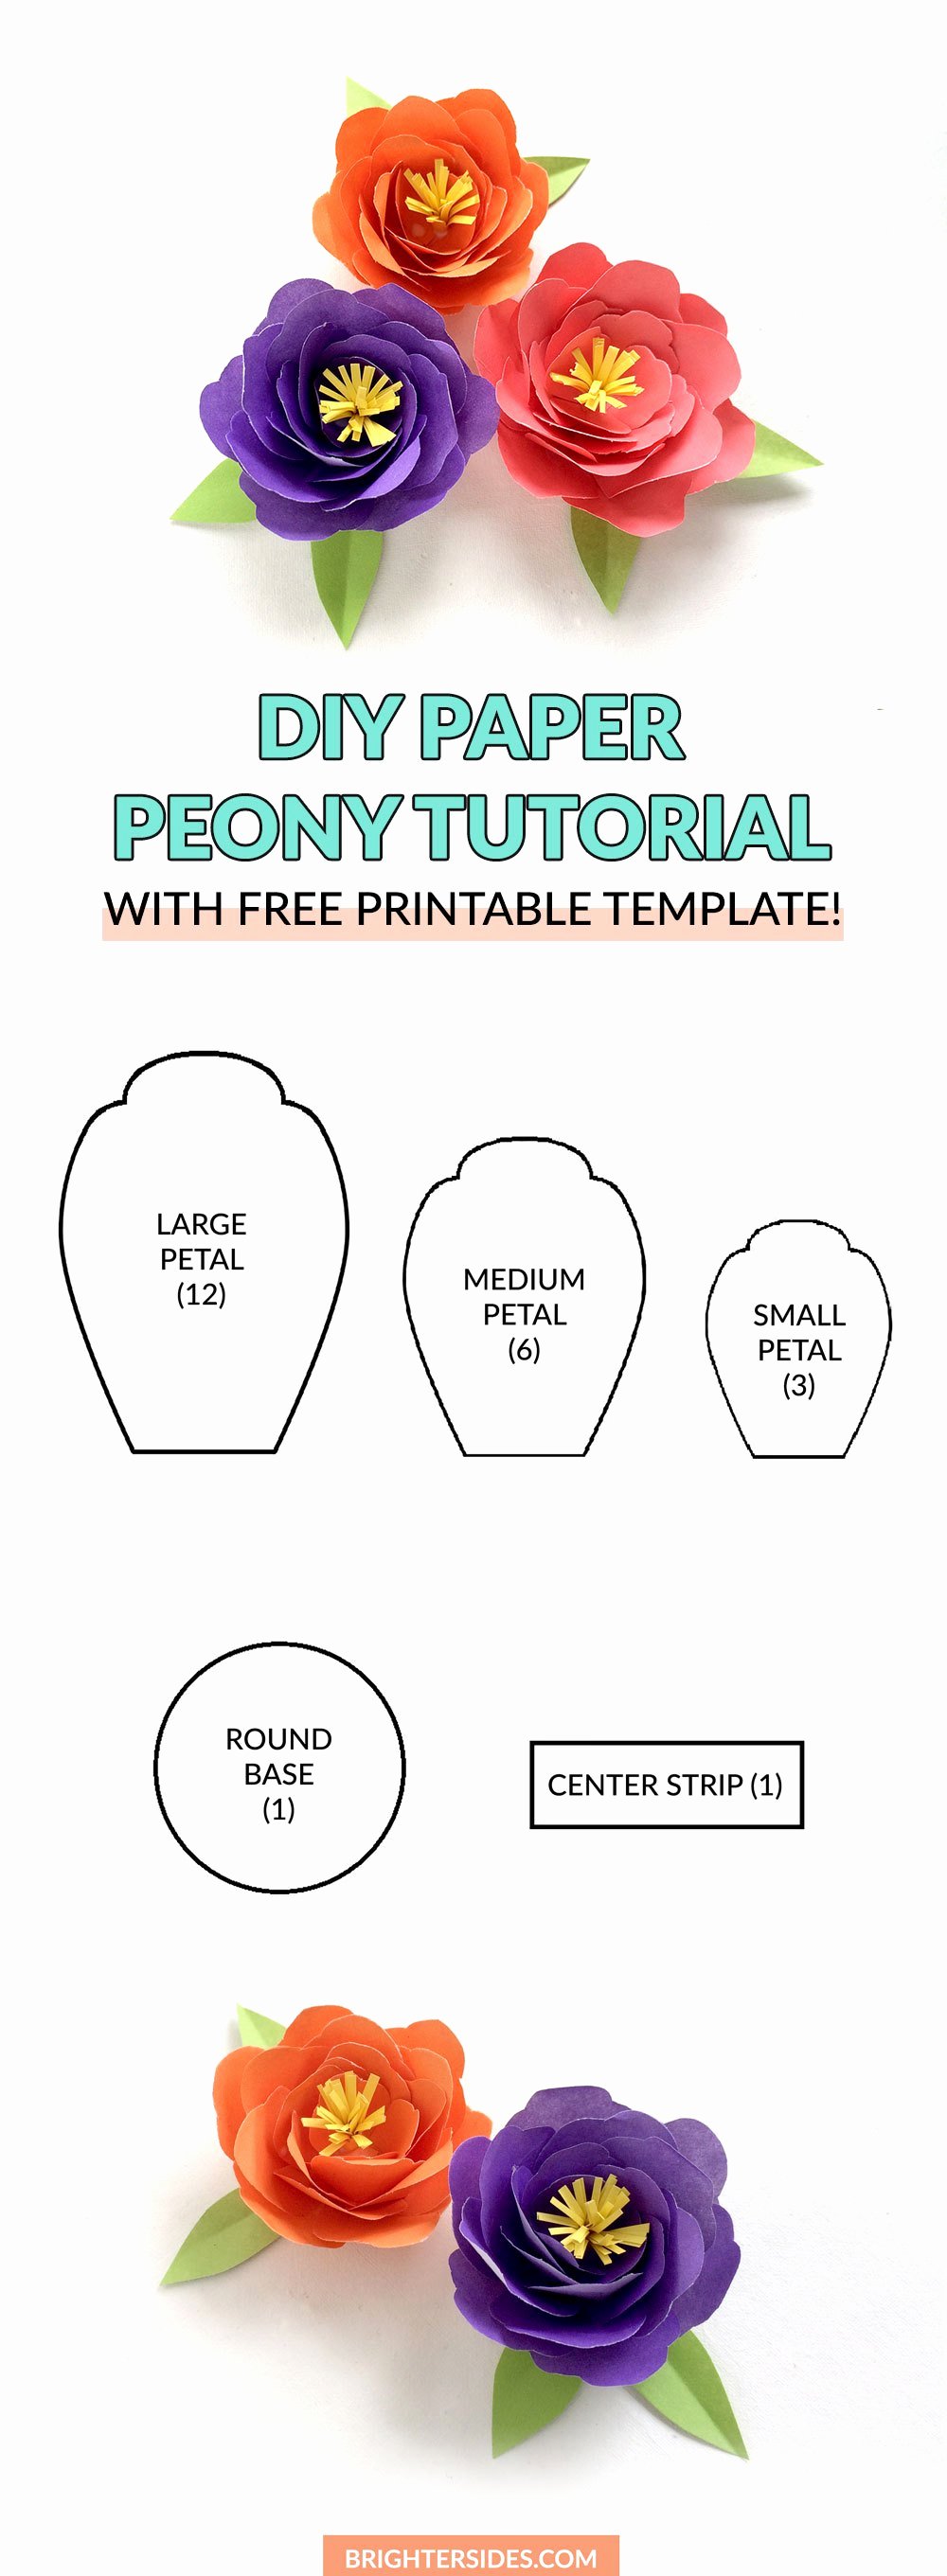 Small Paper Flower Templates Inspirational How to Make Paper Flowers Peony Tutorial Brighter Sides